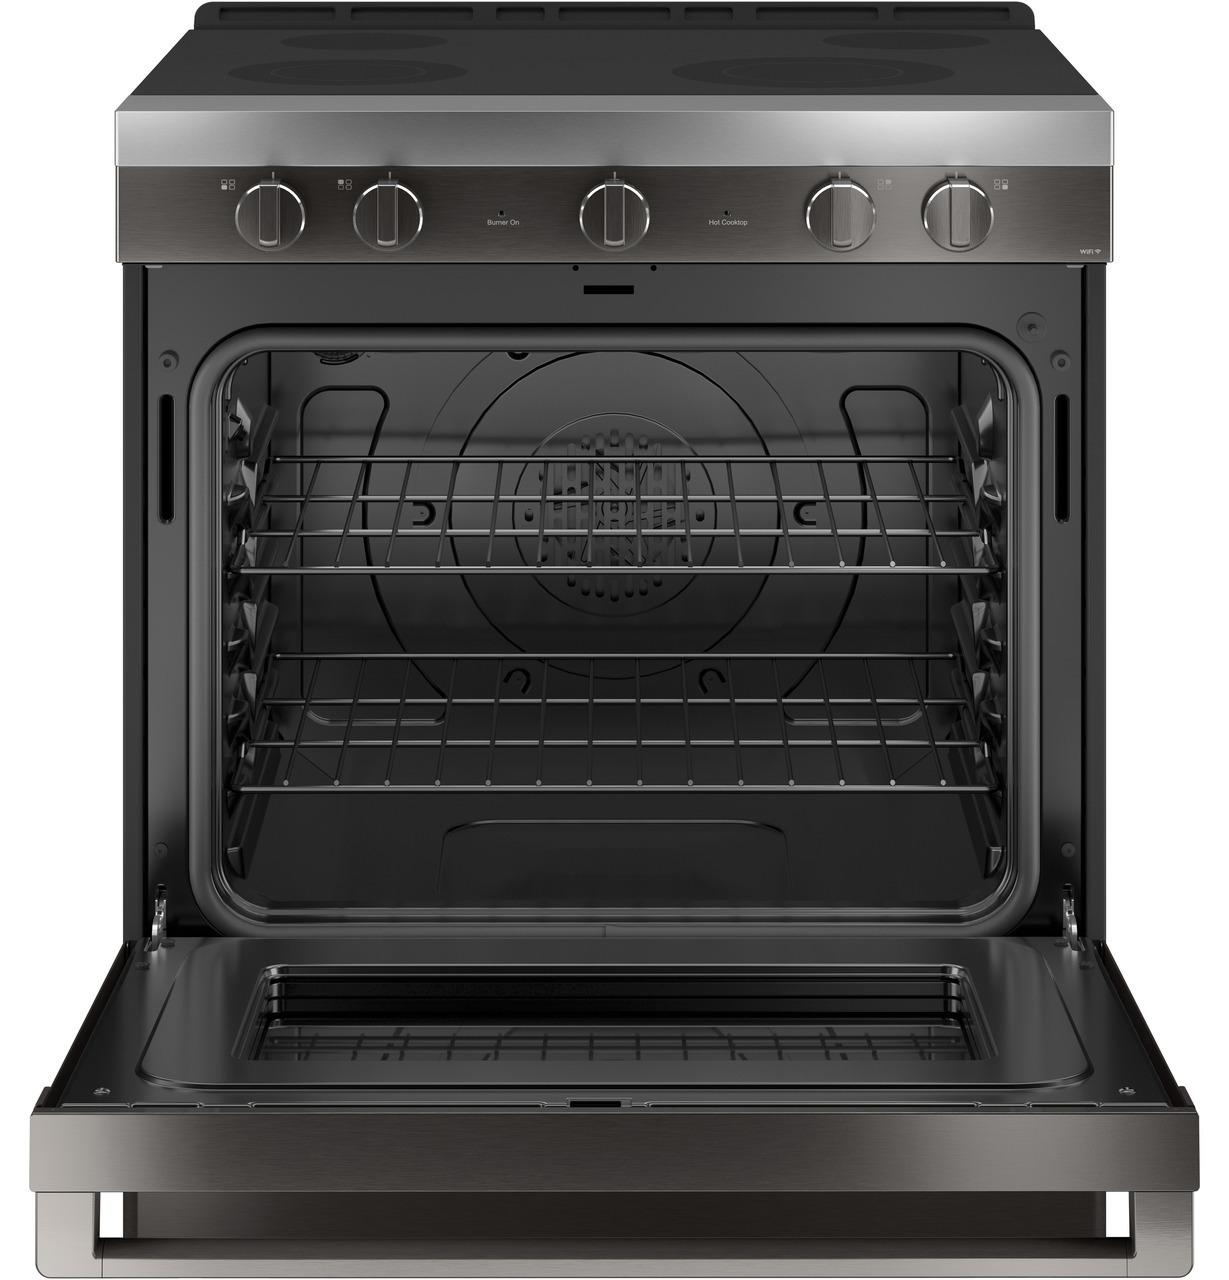 Haier 30" Smart Slide-In Electric Range with Convection